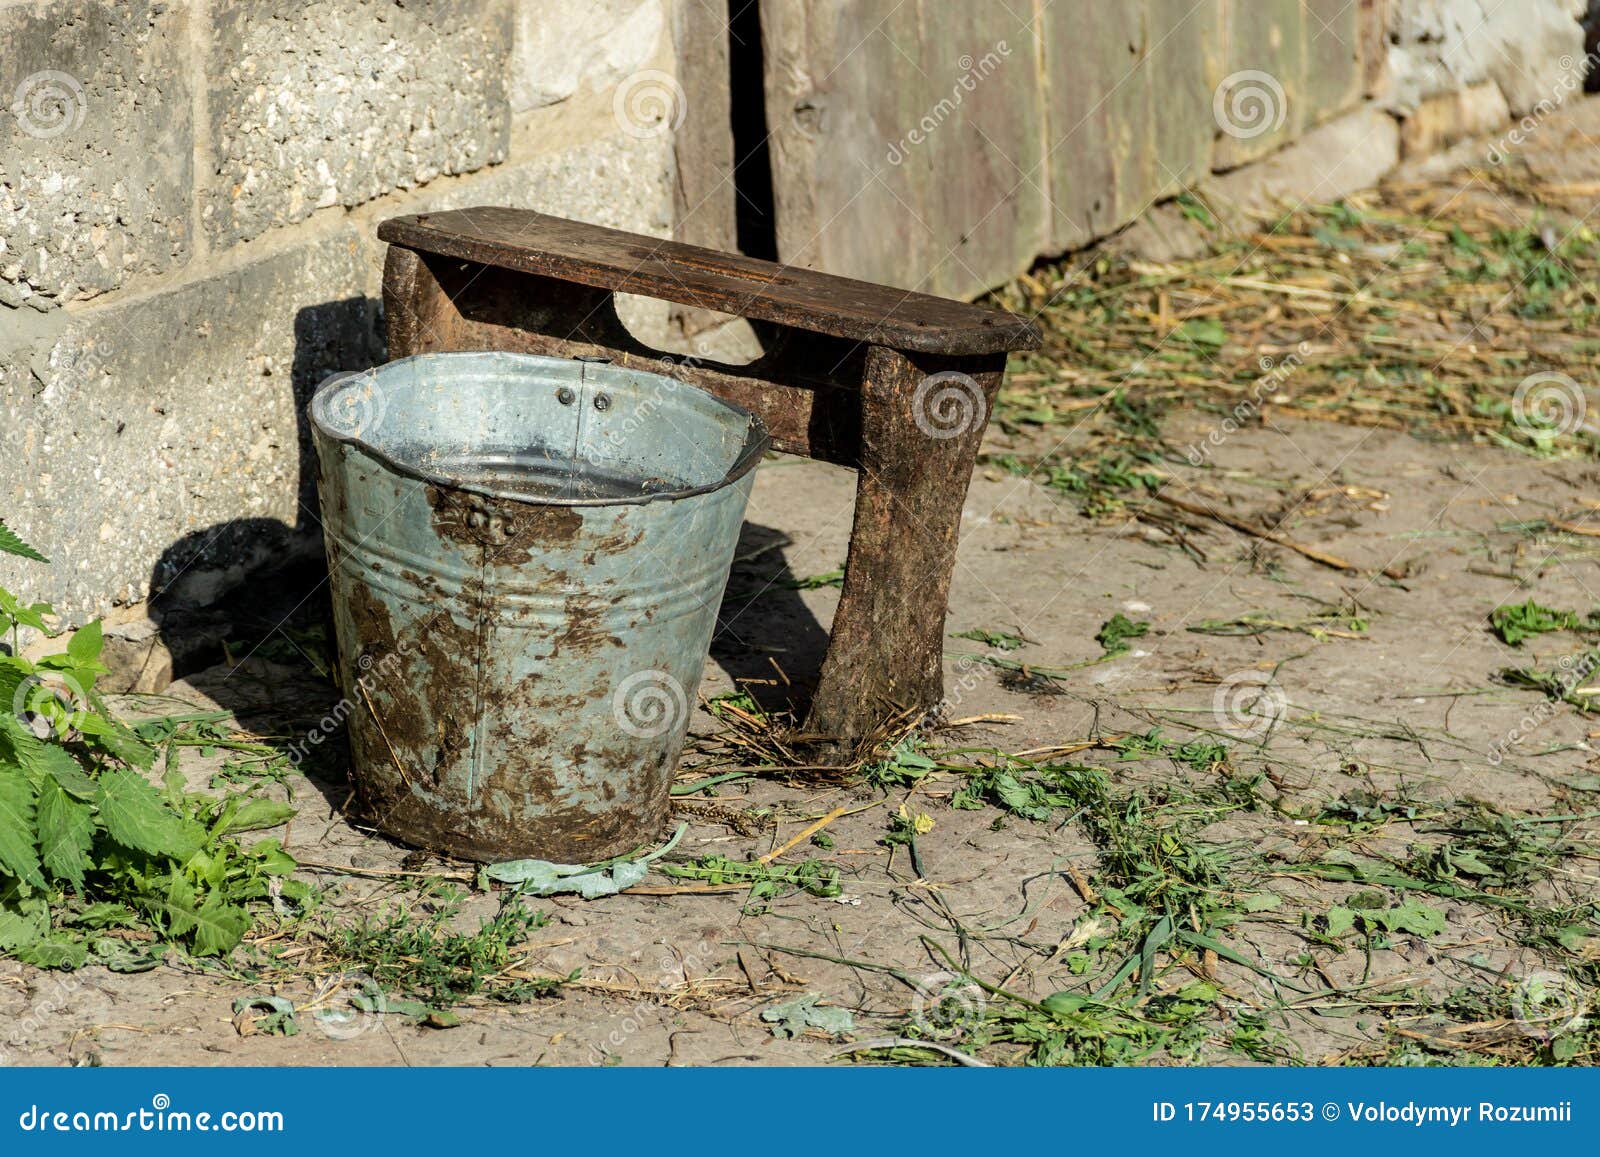 Old Rusty Bucket in the Field by the Pile of Mud and Soil Stock Image -  Image of ground, iron: 174955653